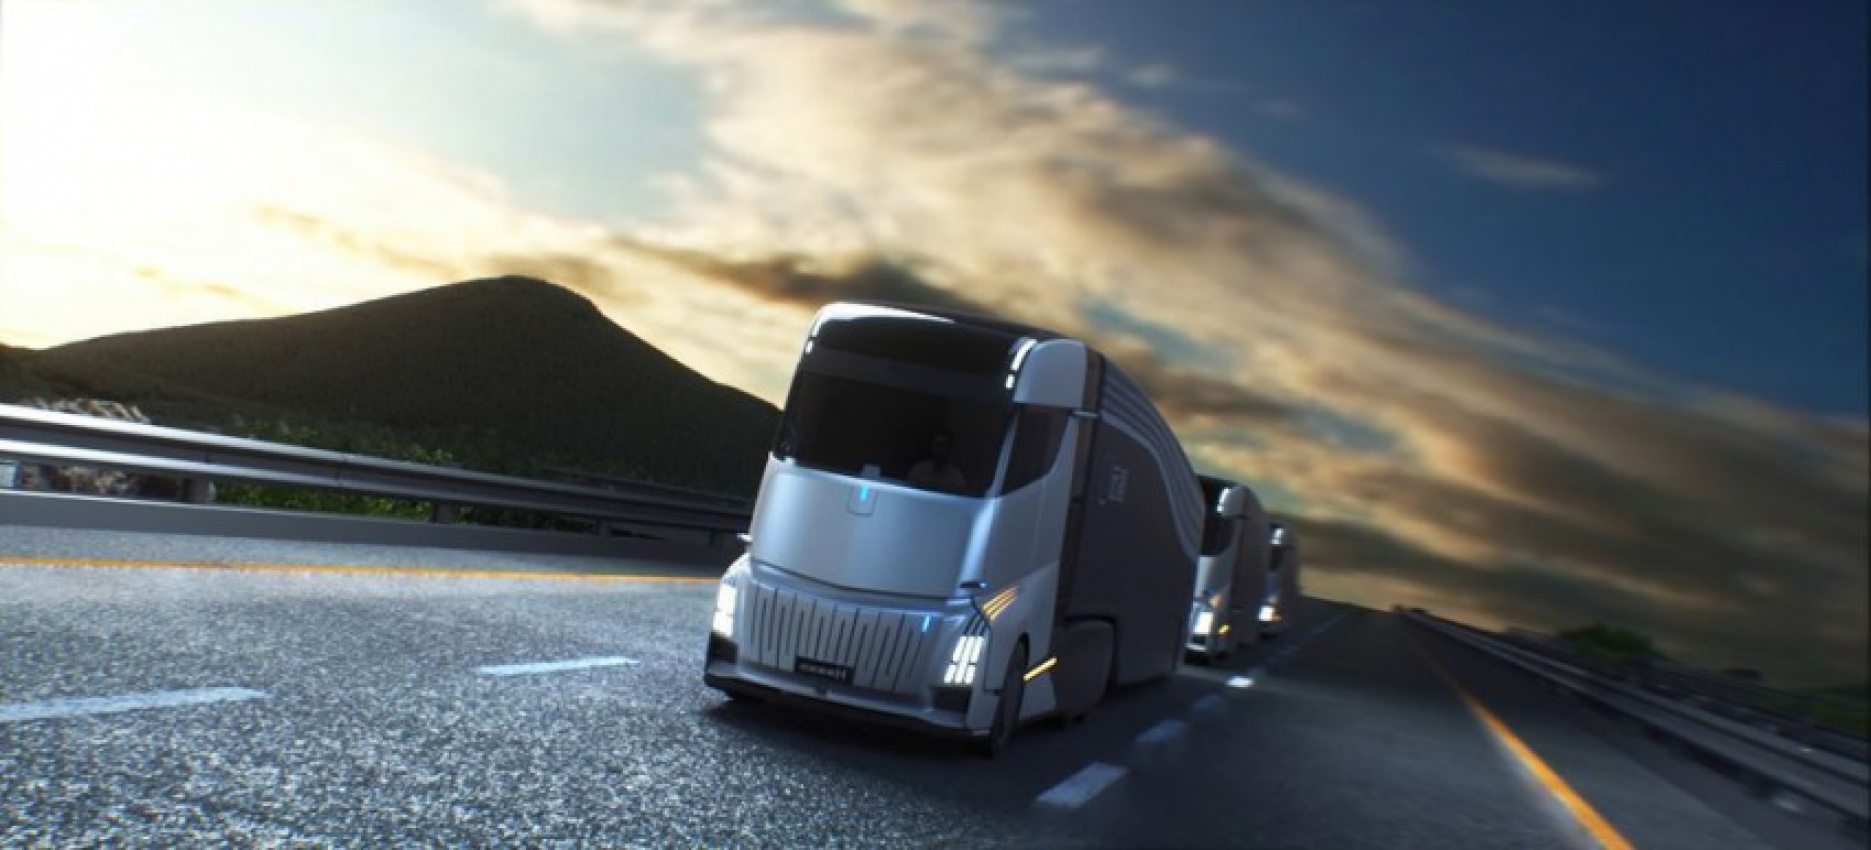 autos, cars, geely, auto news, electric truck, geely homtruck, geely semi, geely truck, geely previews new electric semi-truck - the homtruck